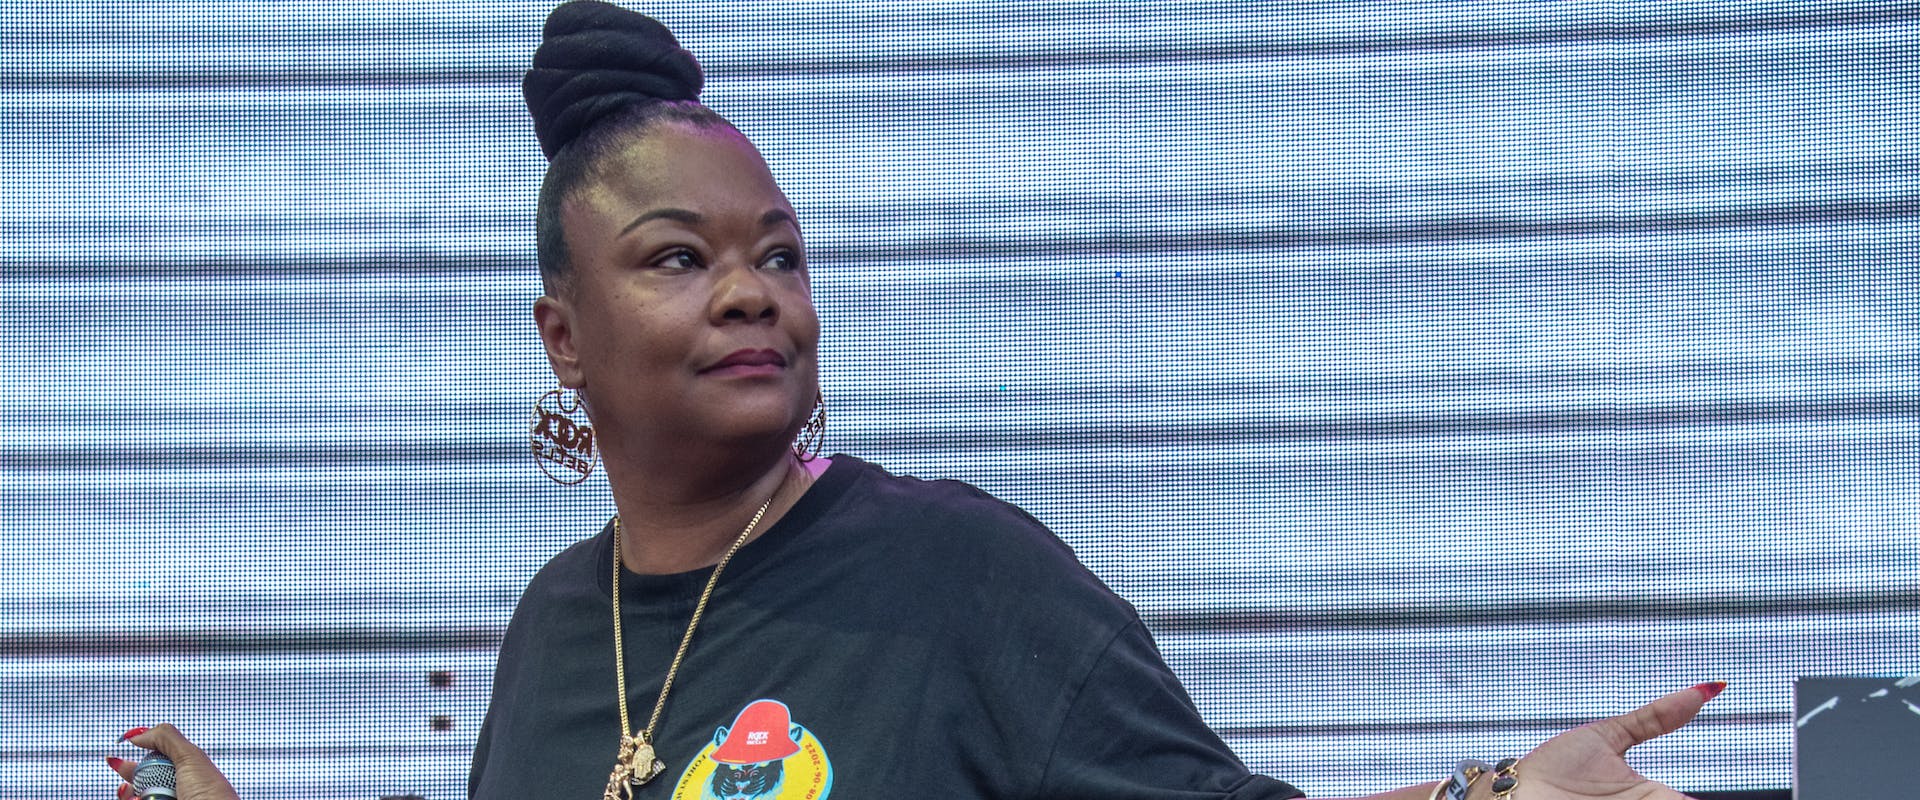 Roxanne Shanté onstage at the 2022 Rock The Bells Festival at Forest Hills Stadium in Forest Hills, Queens, NYC. Aug. 6 2022